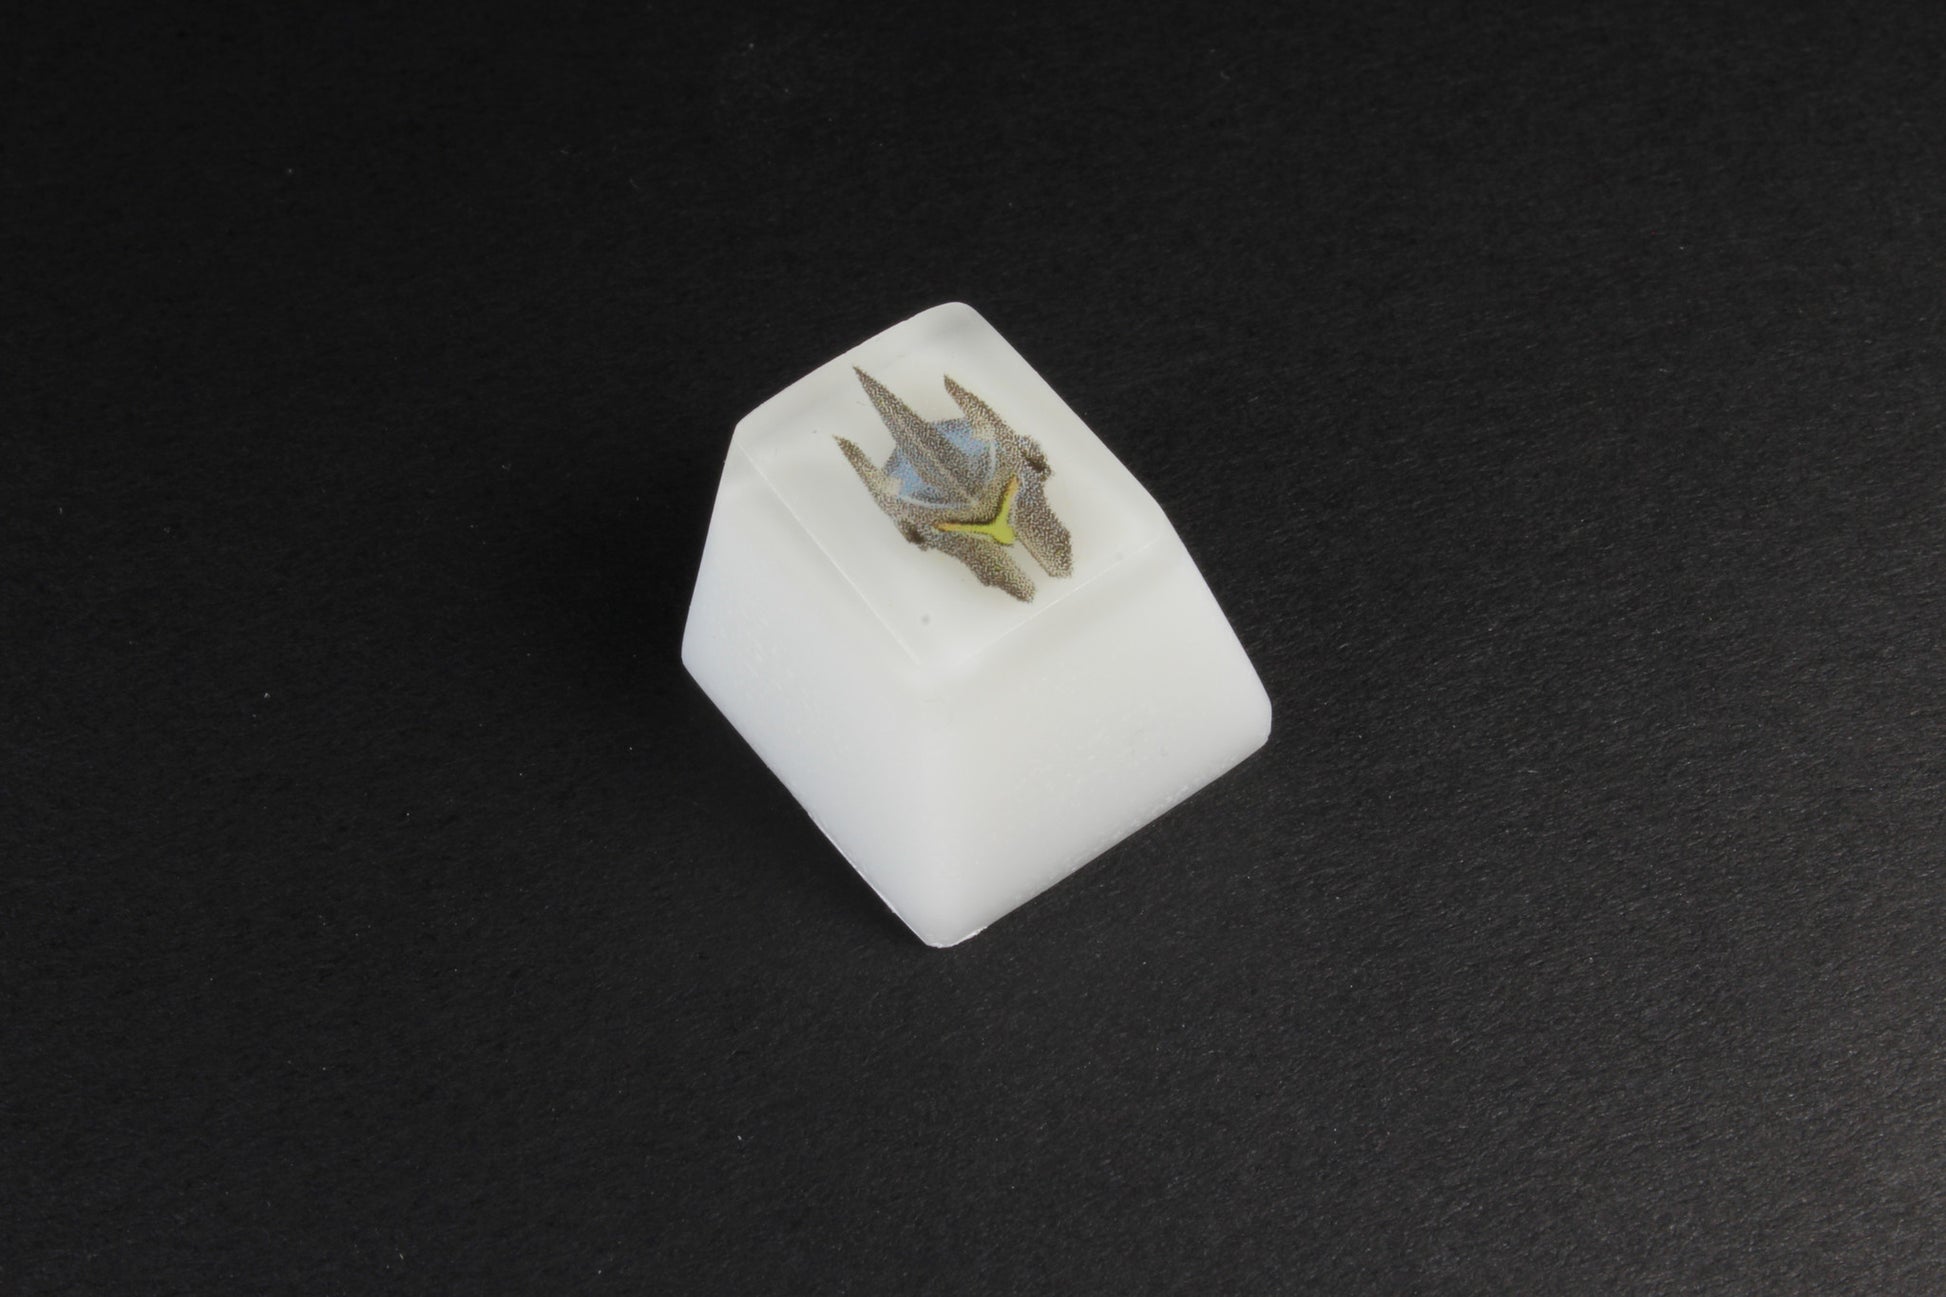 Chaos Caps 1.1 - Reinhardt - PrimeCaps Keycap - Blank and Sculpted Artisan Keycaps for cherry MX mechanical keyboards 